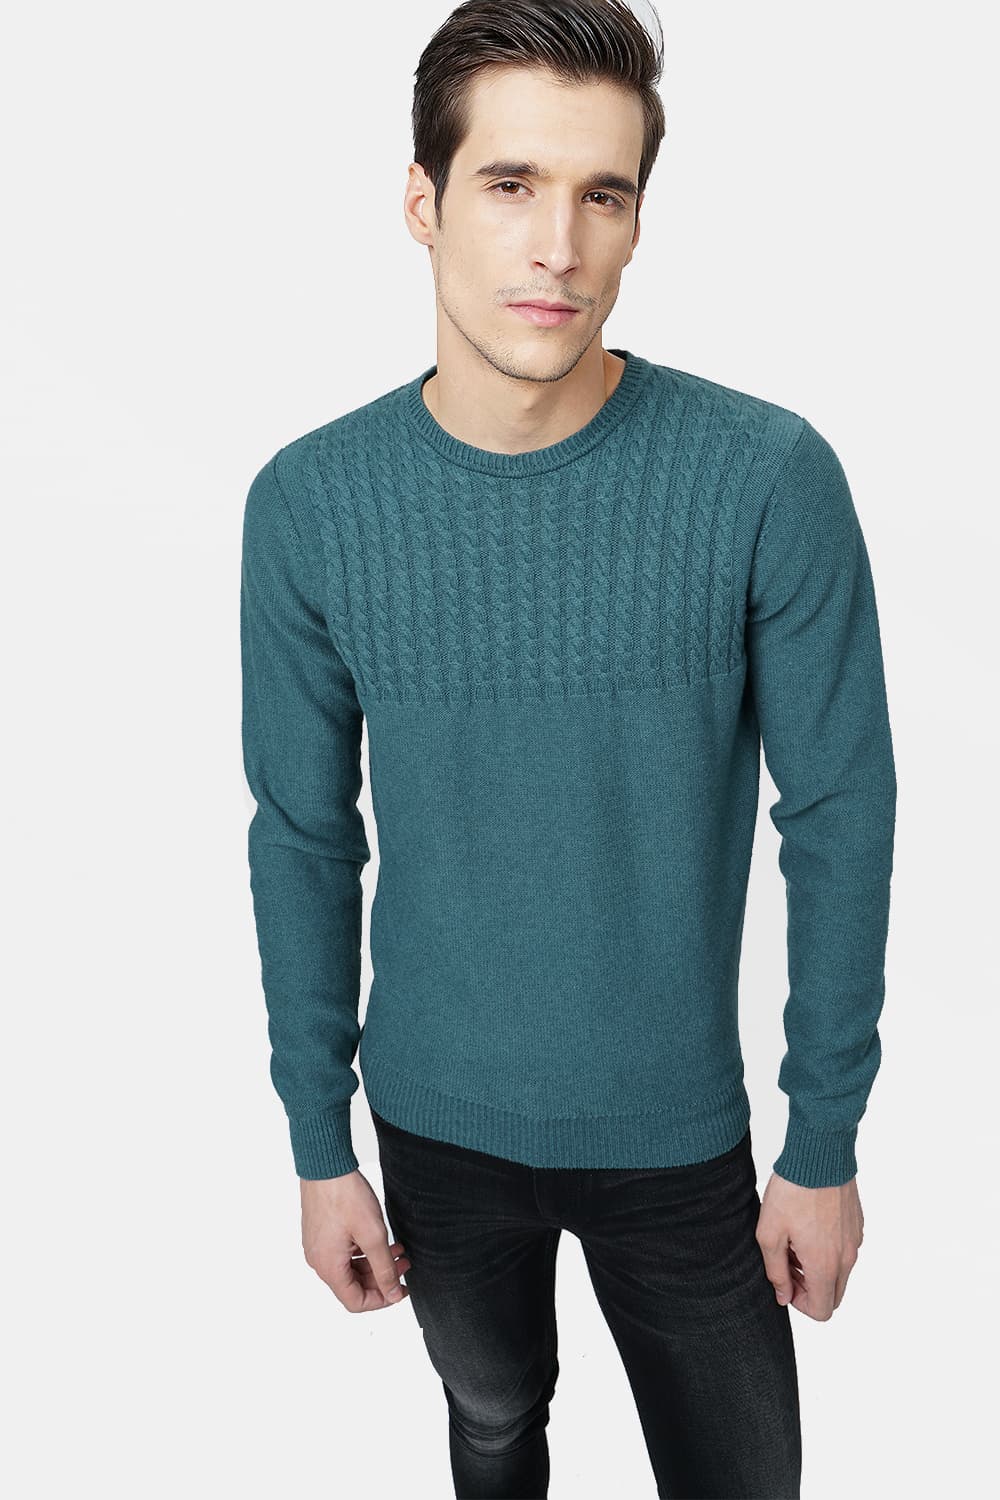 BASICS MUSCLE FIT CREW NECK SWEATER